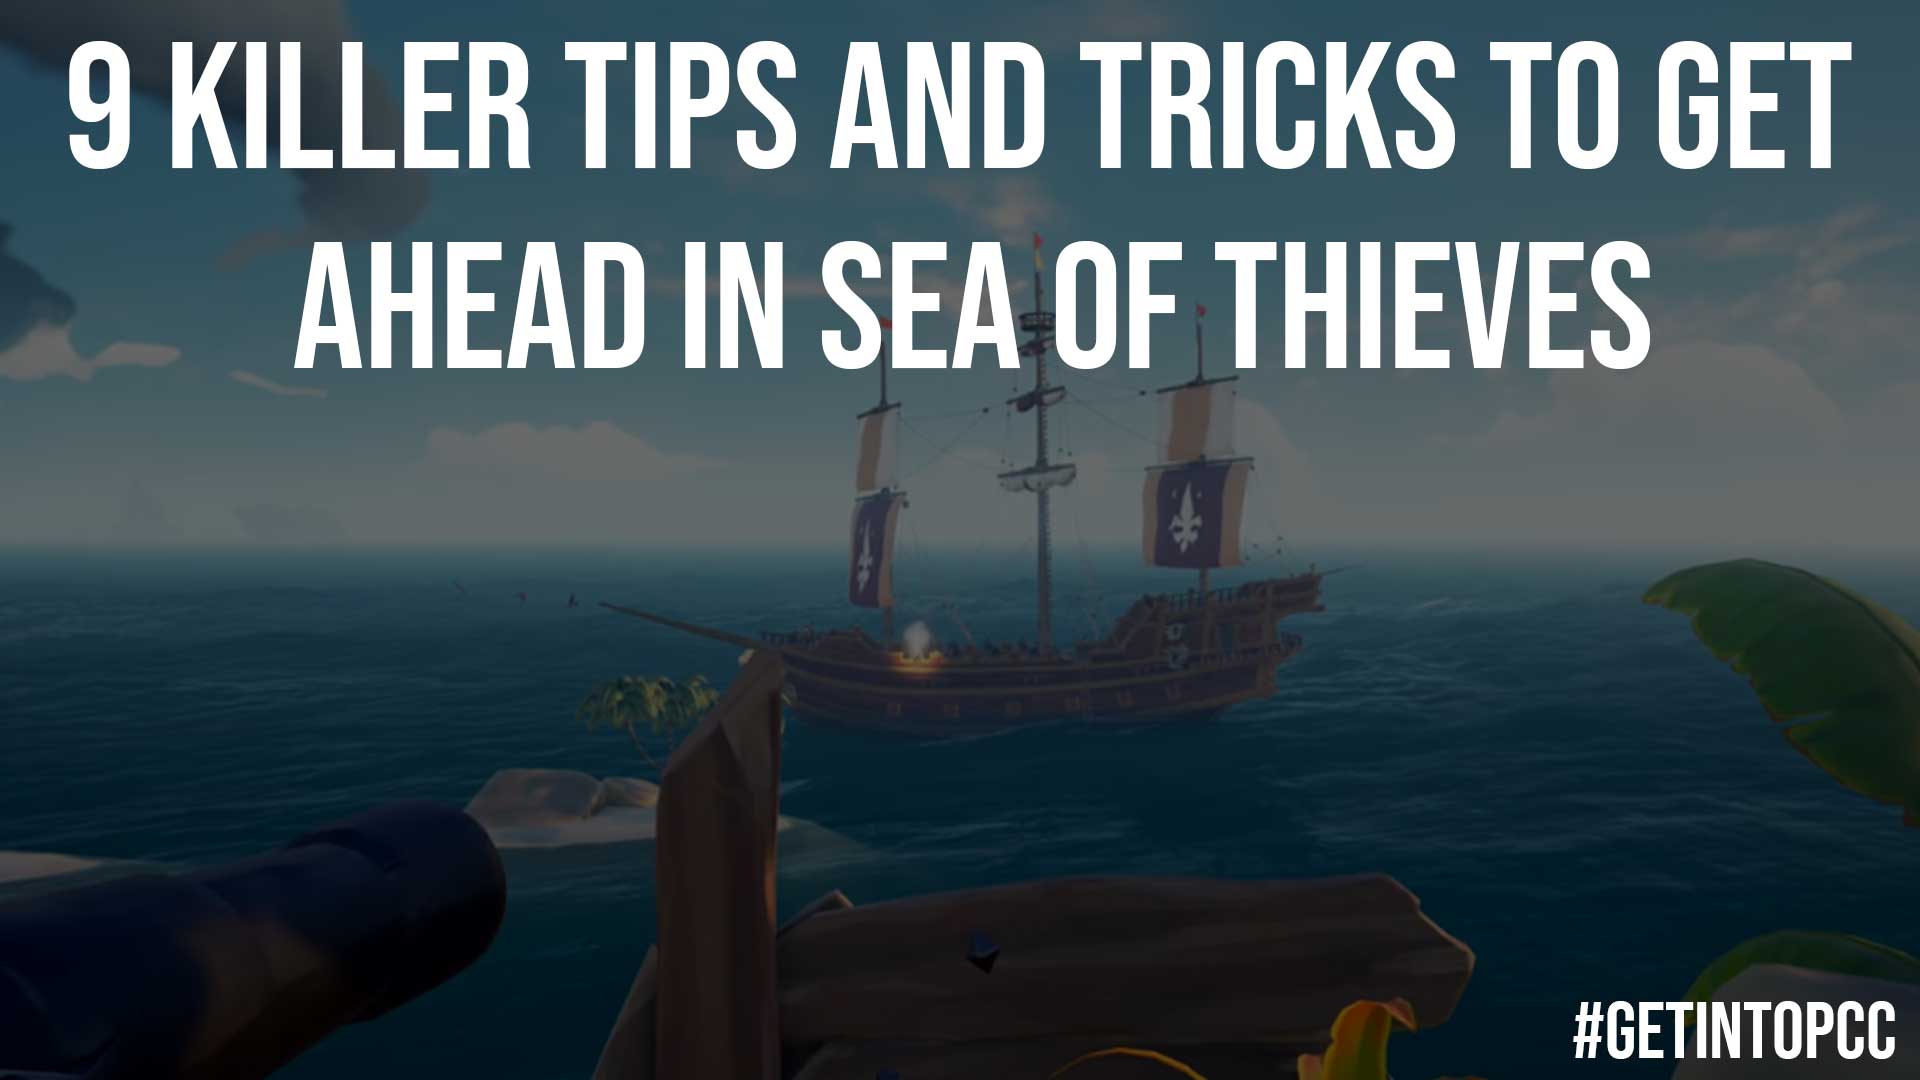 9 Killer Tips and Tricks to Get Ahead in Sea of Thieves